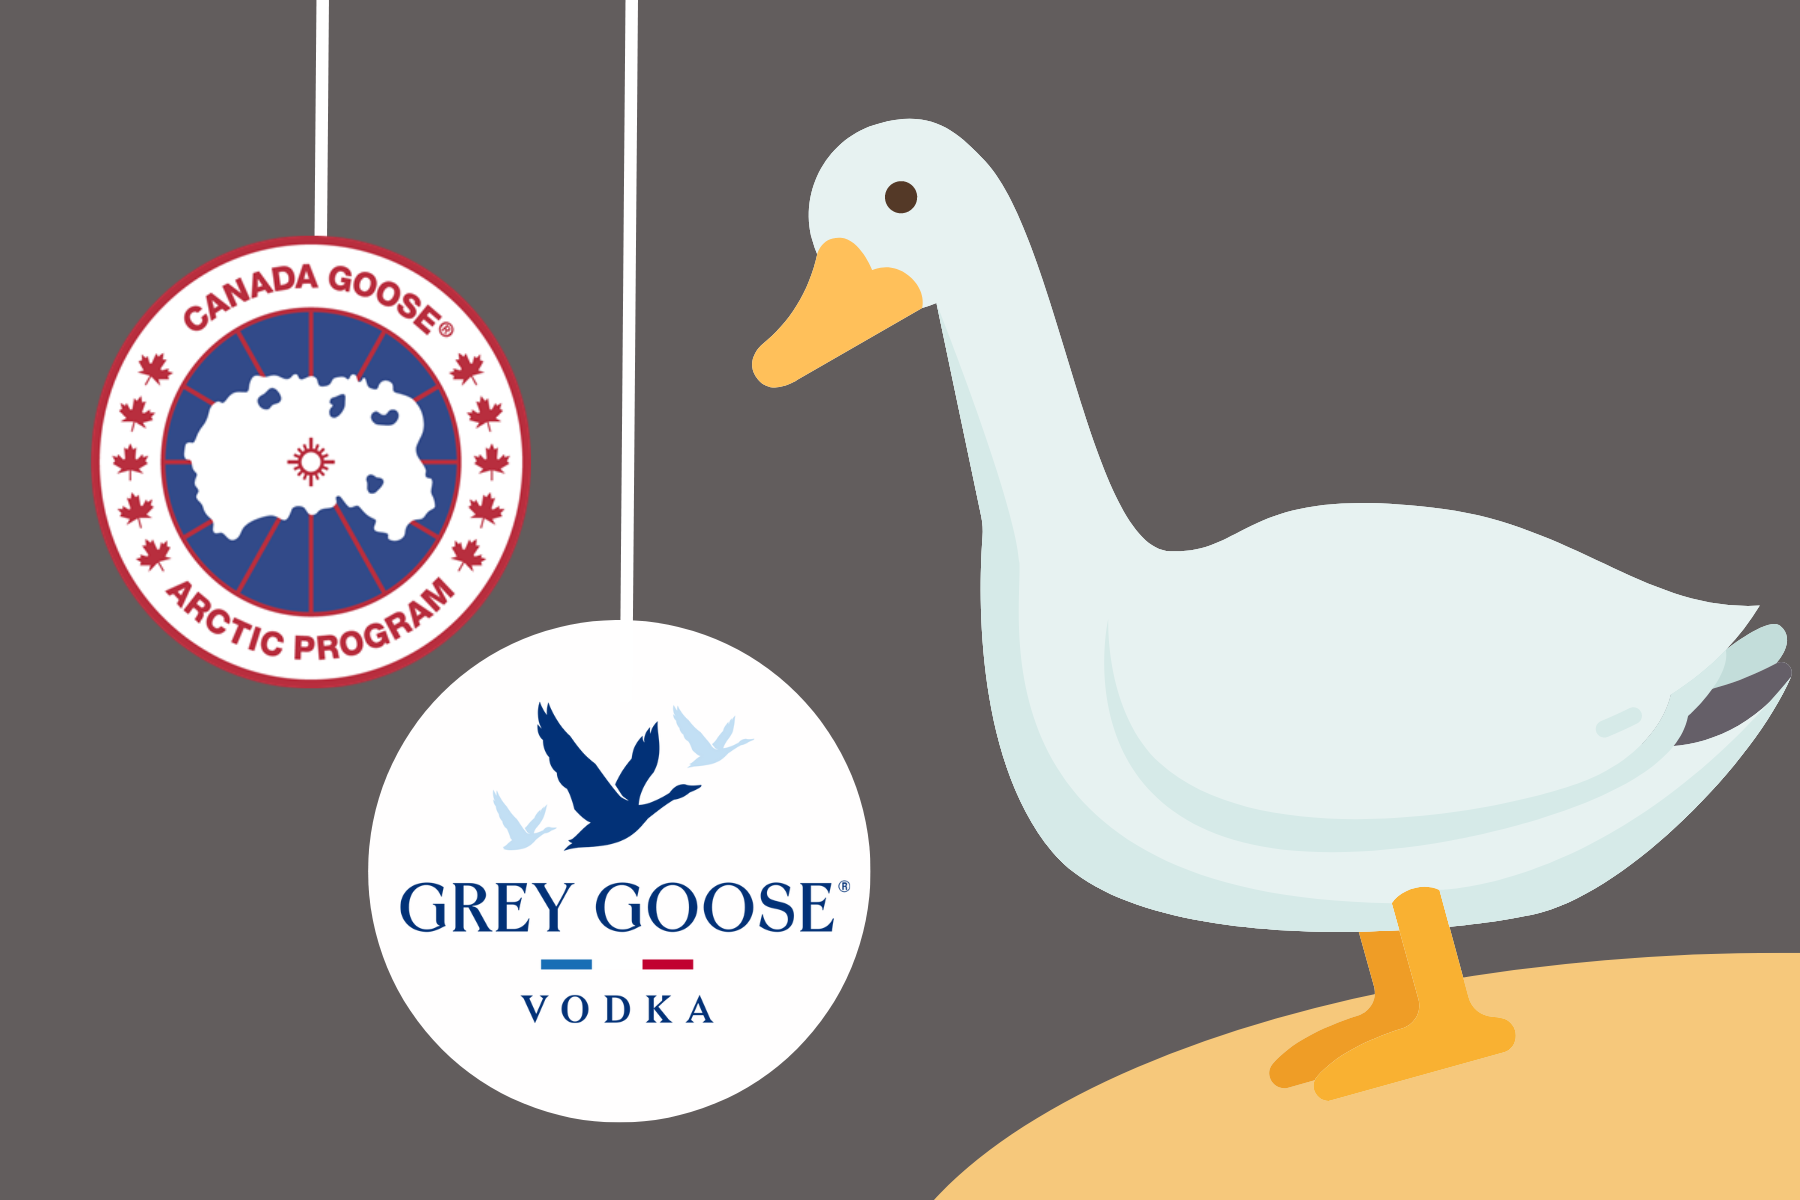 Chloe Hunt | Canada Goose, Grey Goose, or just a silly goose?